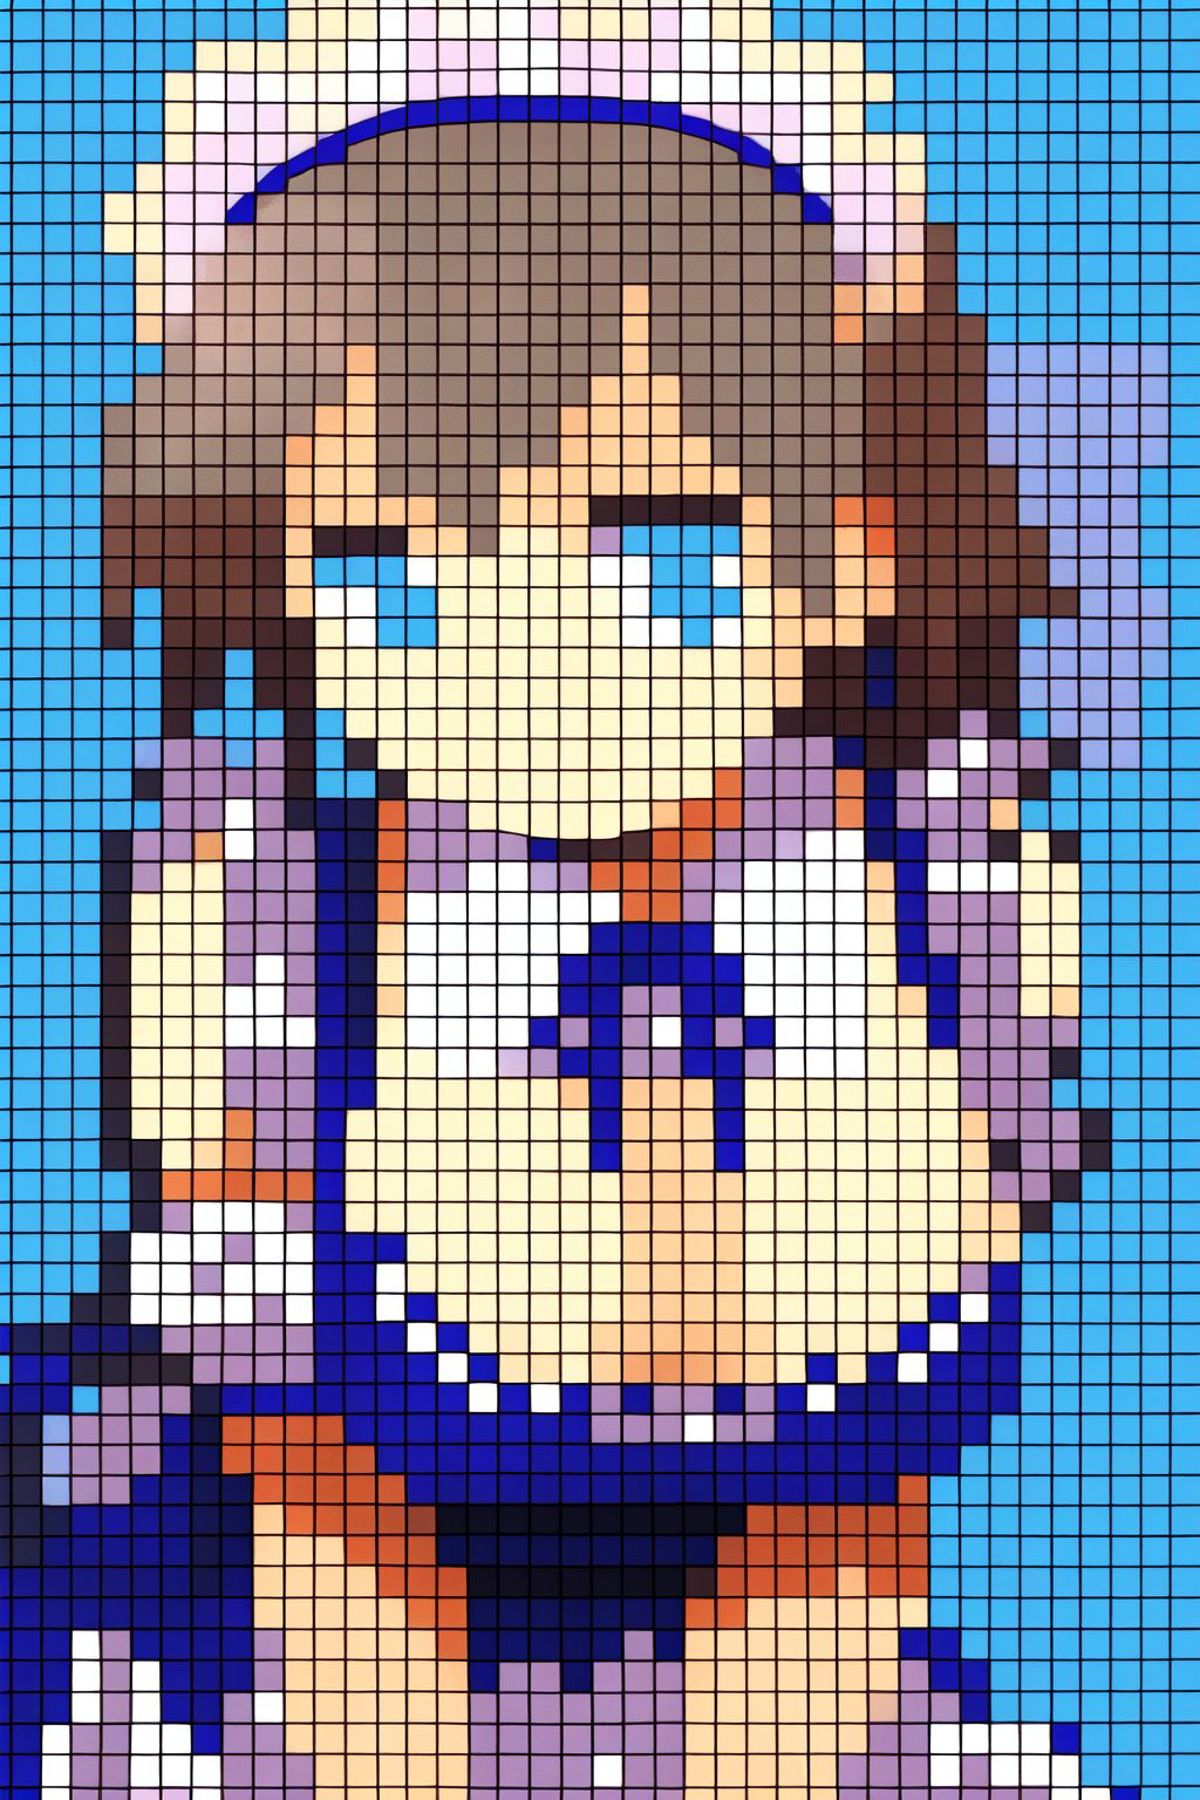 Pixel Art Grid image by PANyZHAL